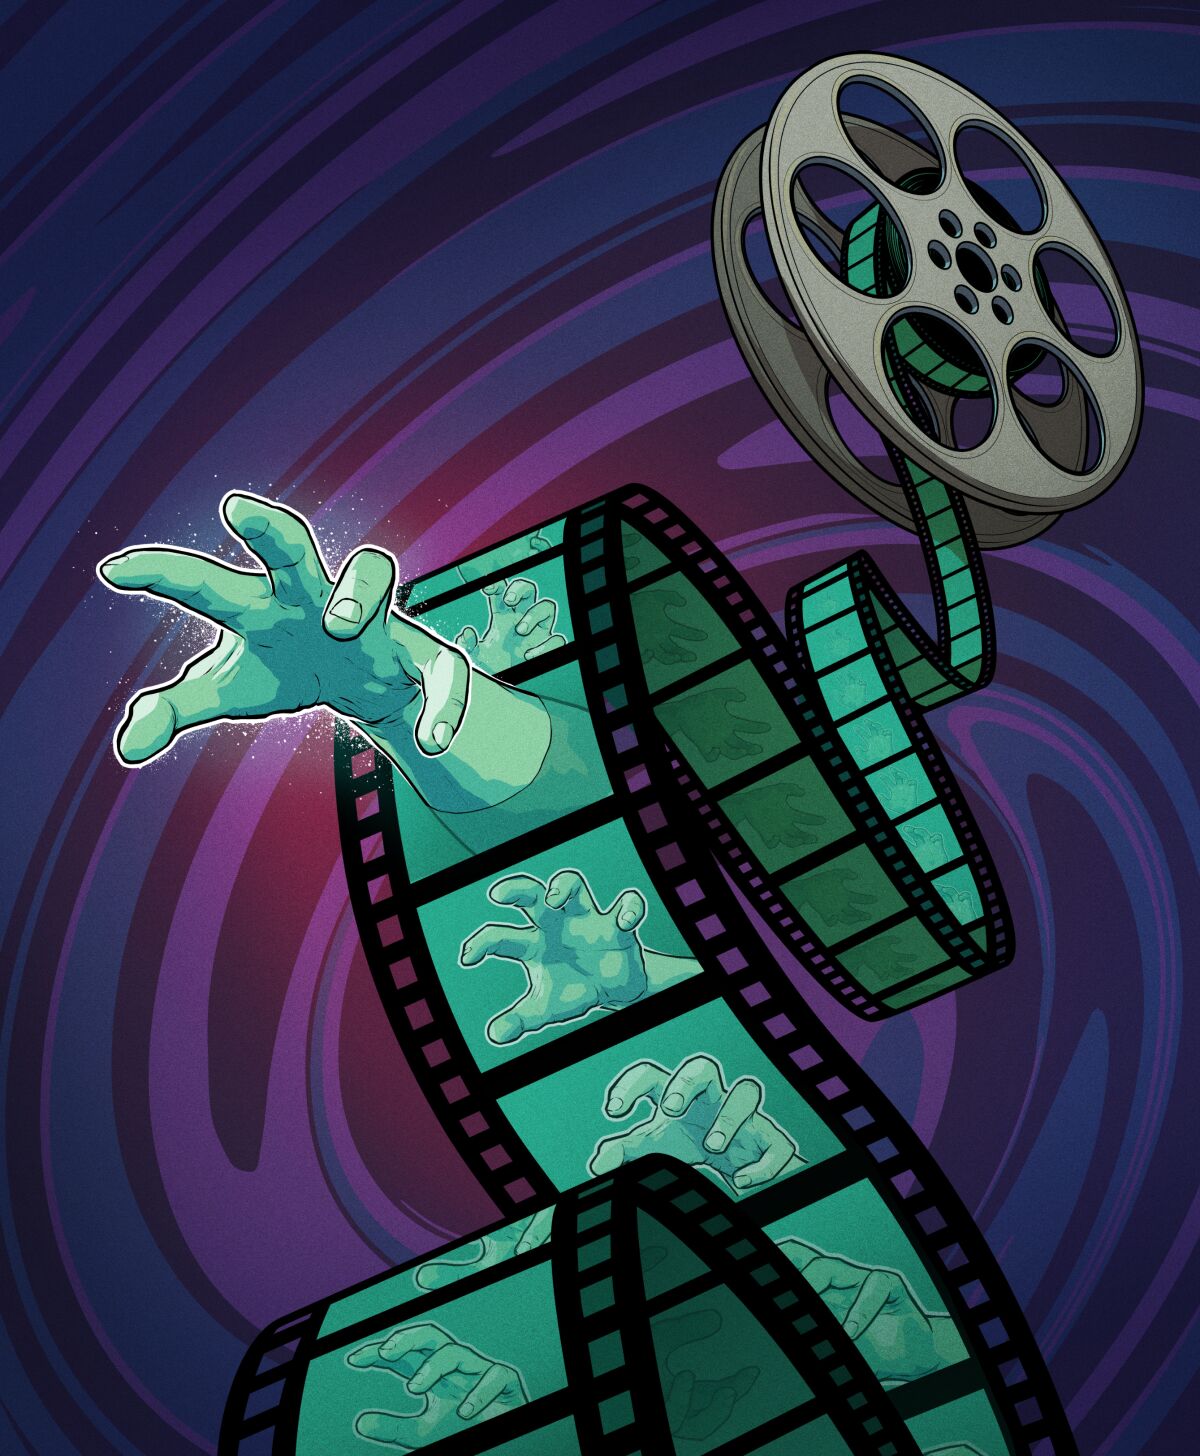 An illustration of ghostly hands reaching out from film strips.